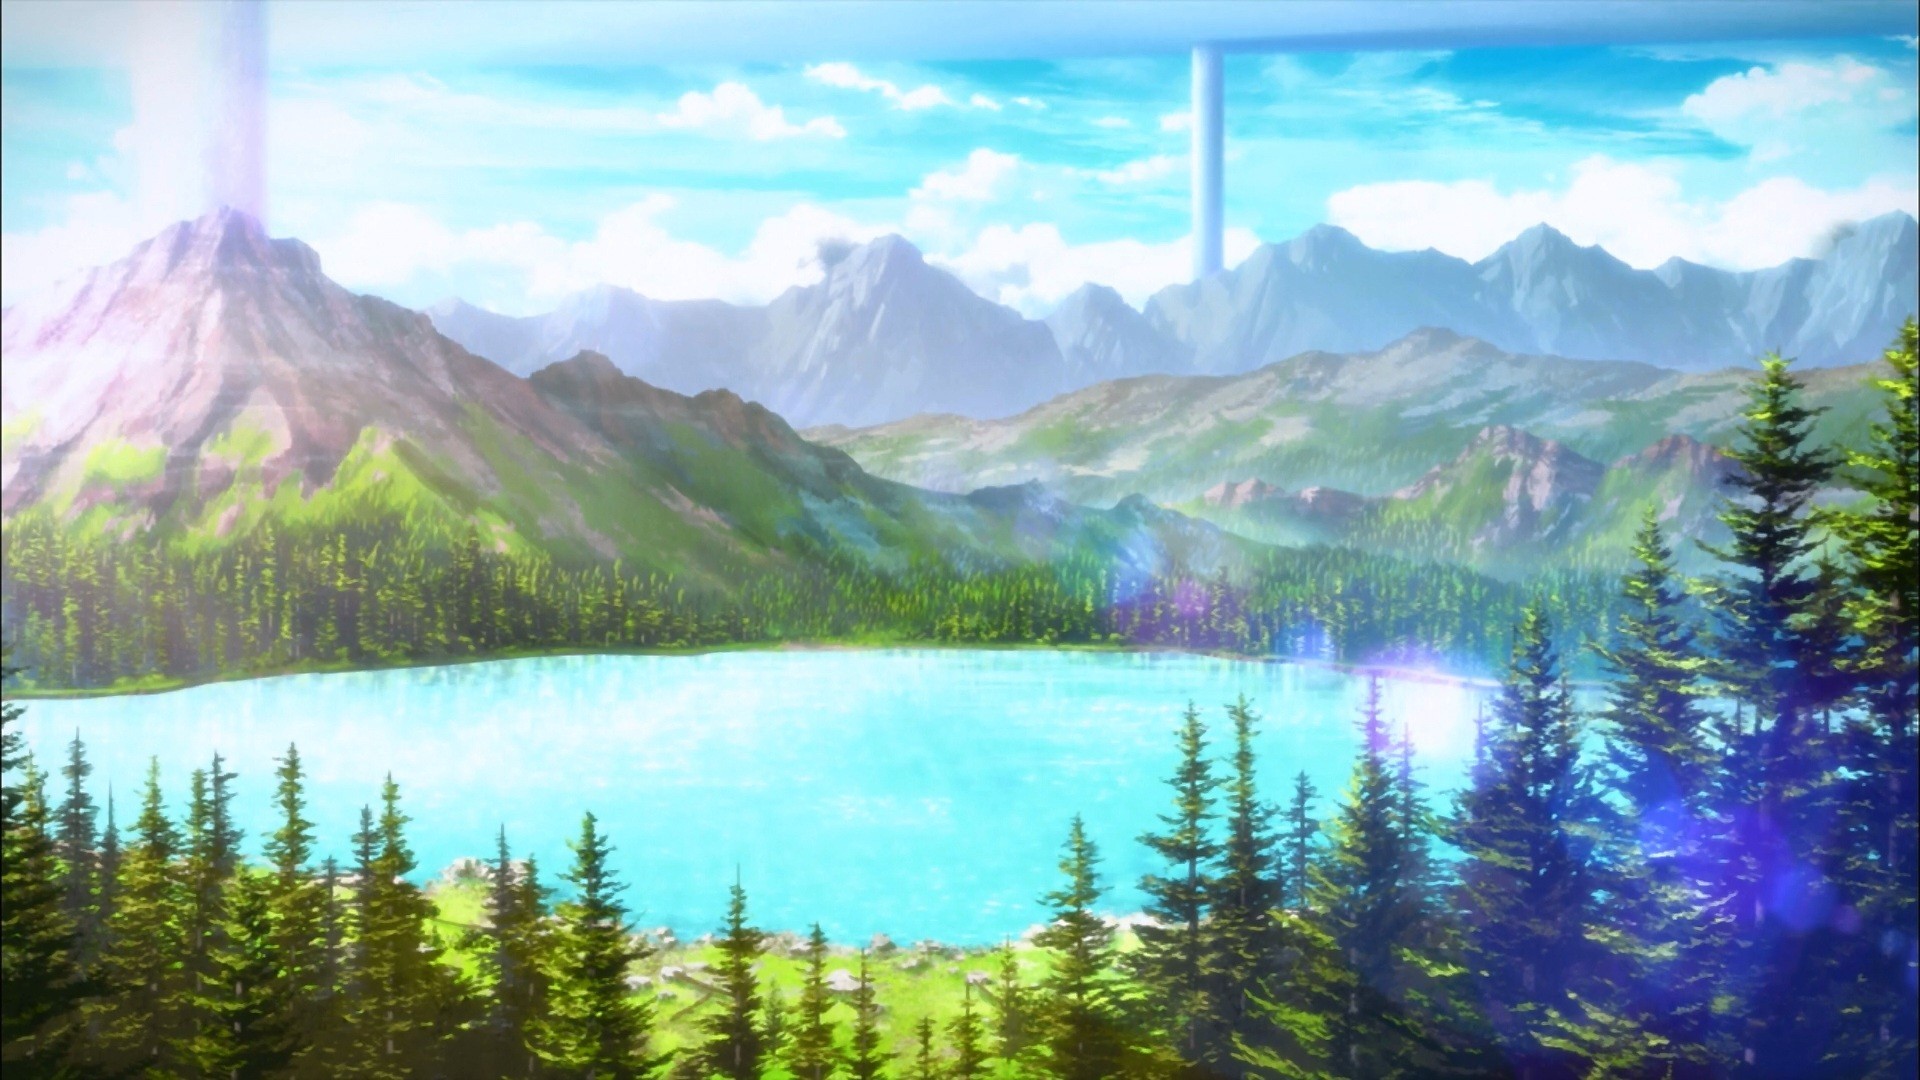 1920x1080 ... hd wallpapers backgrounds; anime landscape sword art online mountains  trees ...